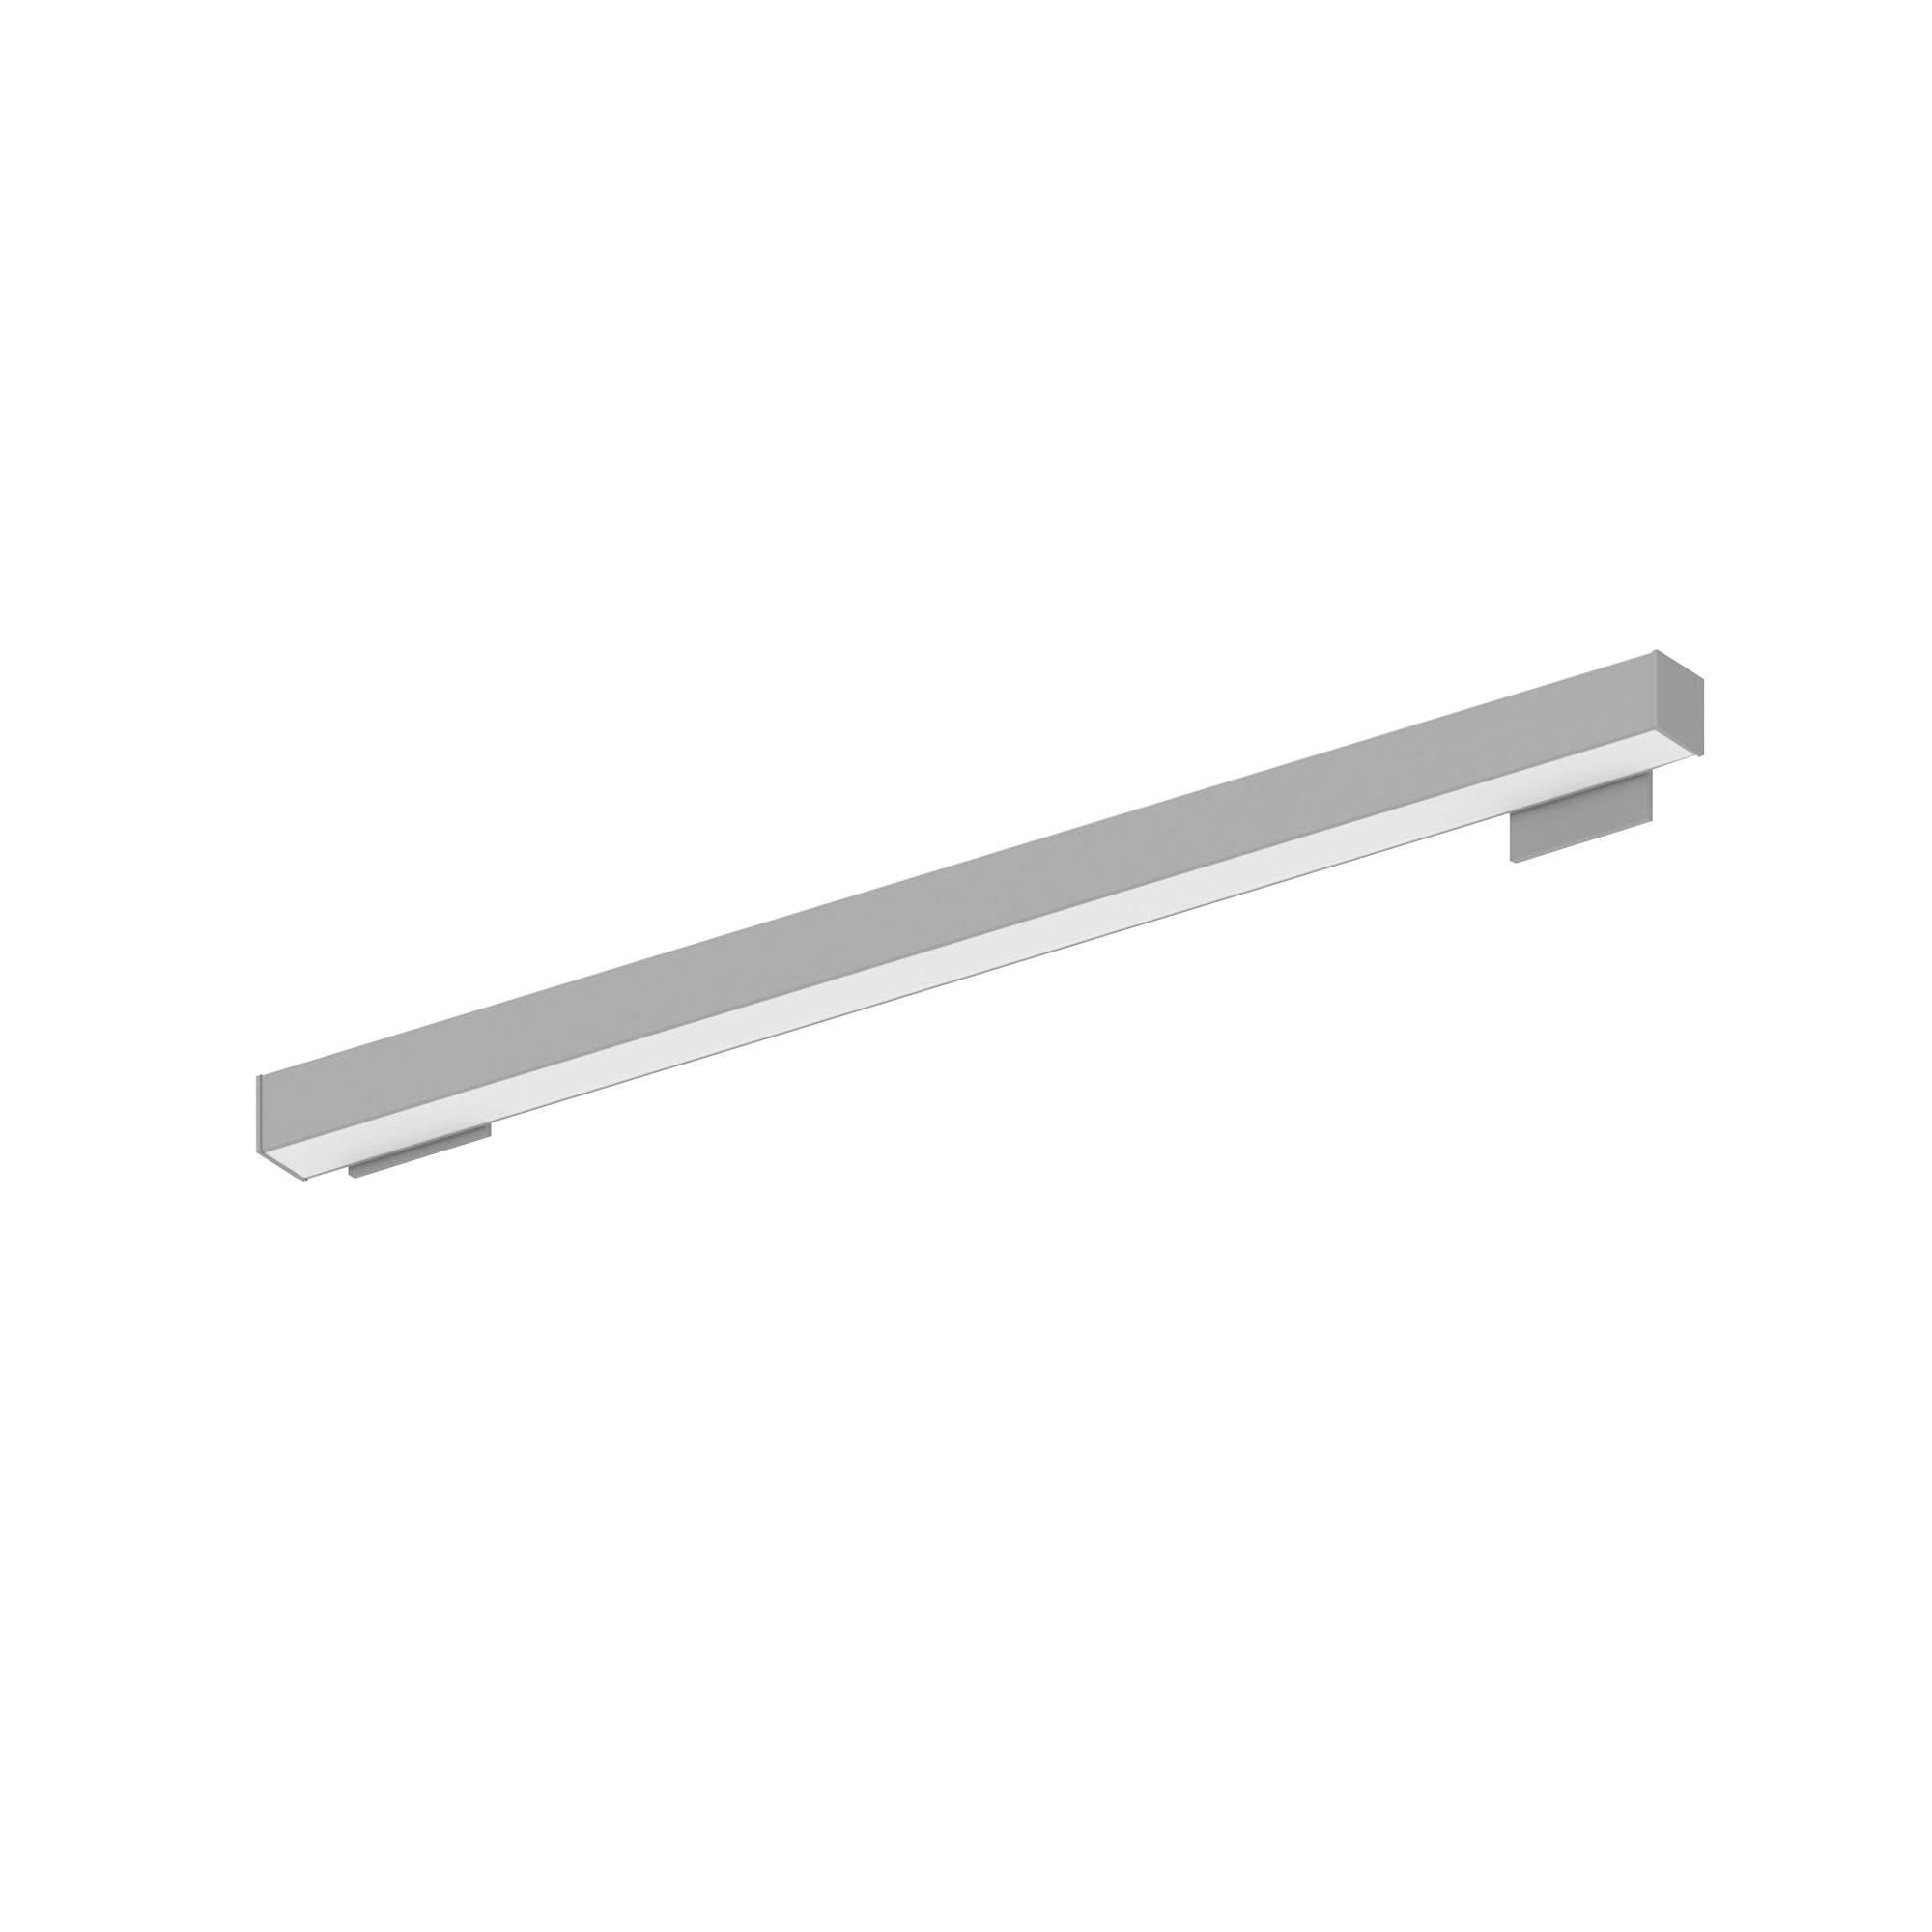 Nora Lighting NWLIN-41035A/L2-R4 - Linear - 4' L-Line LED Wall Mount Linear, 4200lm / 3500K, 2 Inchx4 Inch Left Plate & 4 Inchx4 Inch Right Plate, Aluminum Finish